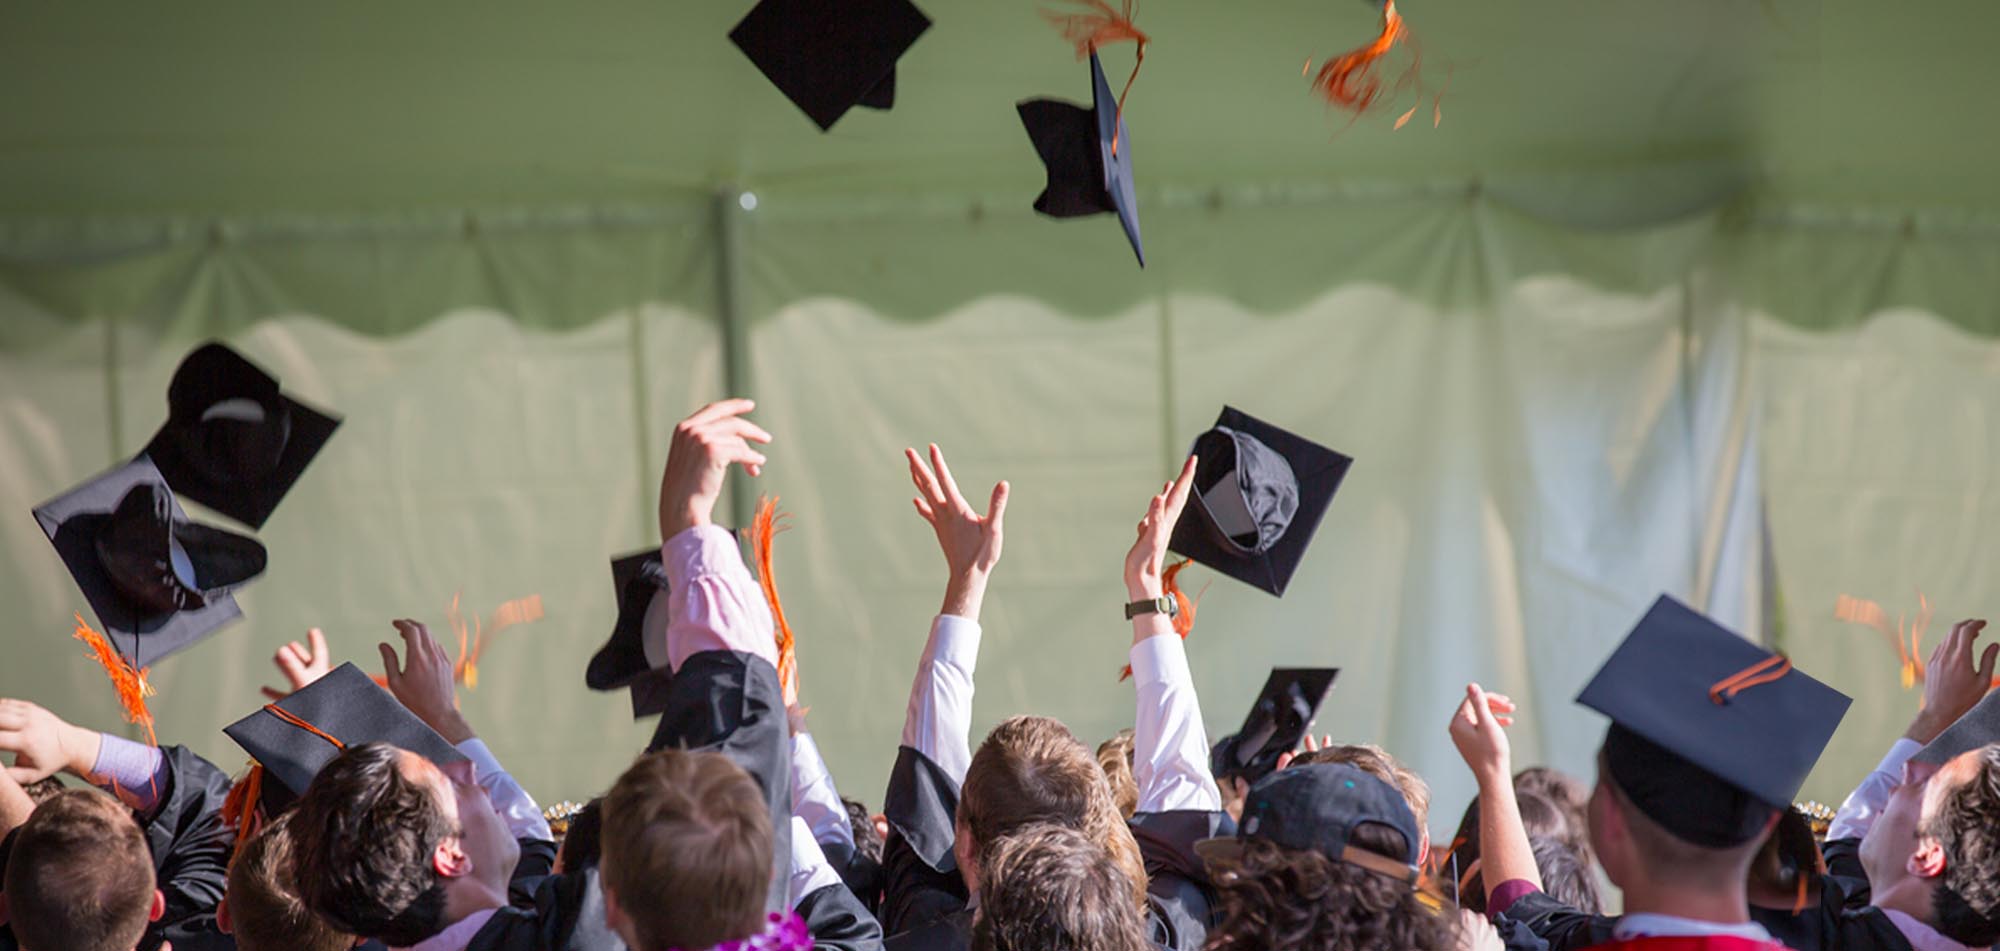 A large group graduating students throwing their caps in the air